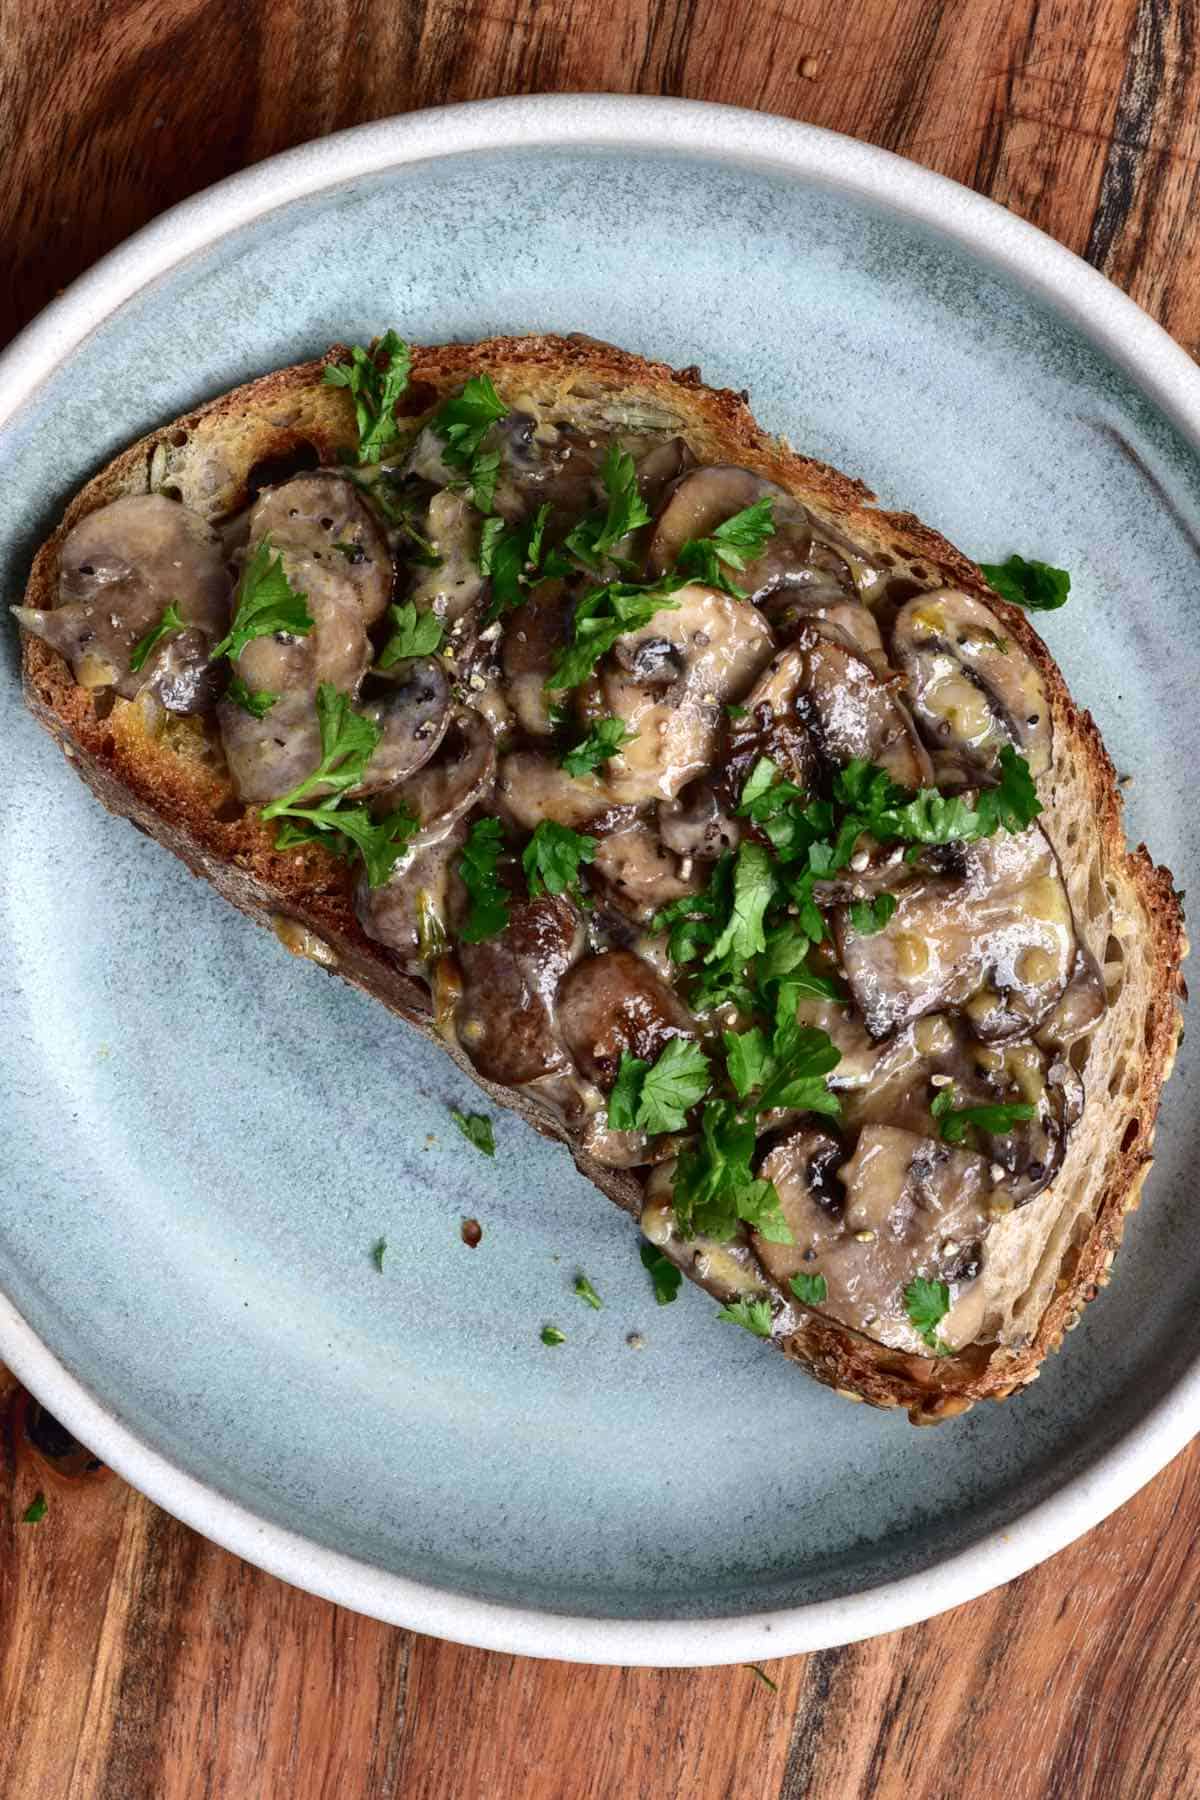 Toasted bread topped with mushrooms in a round plate